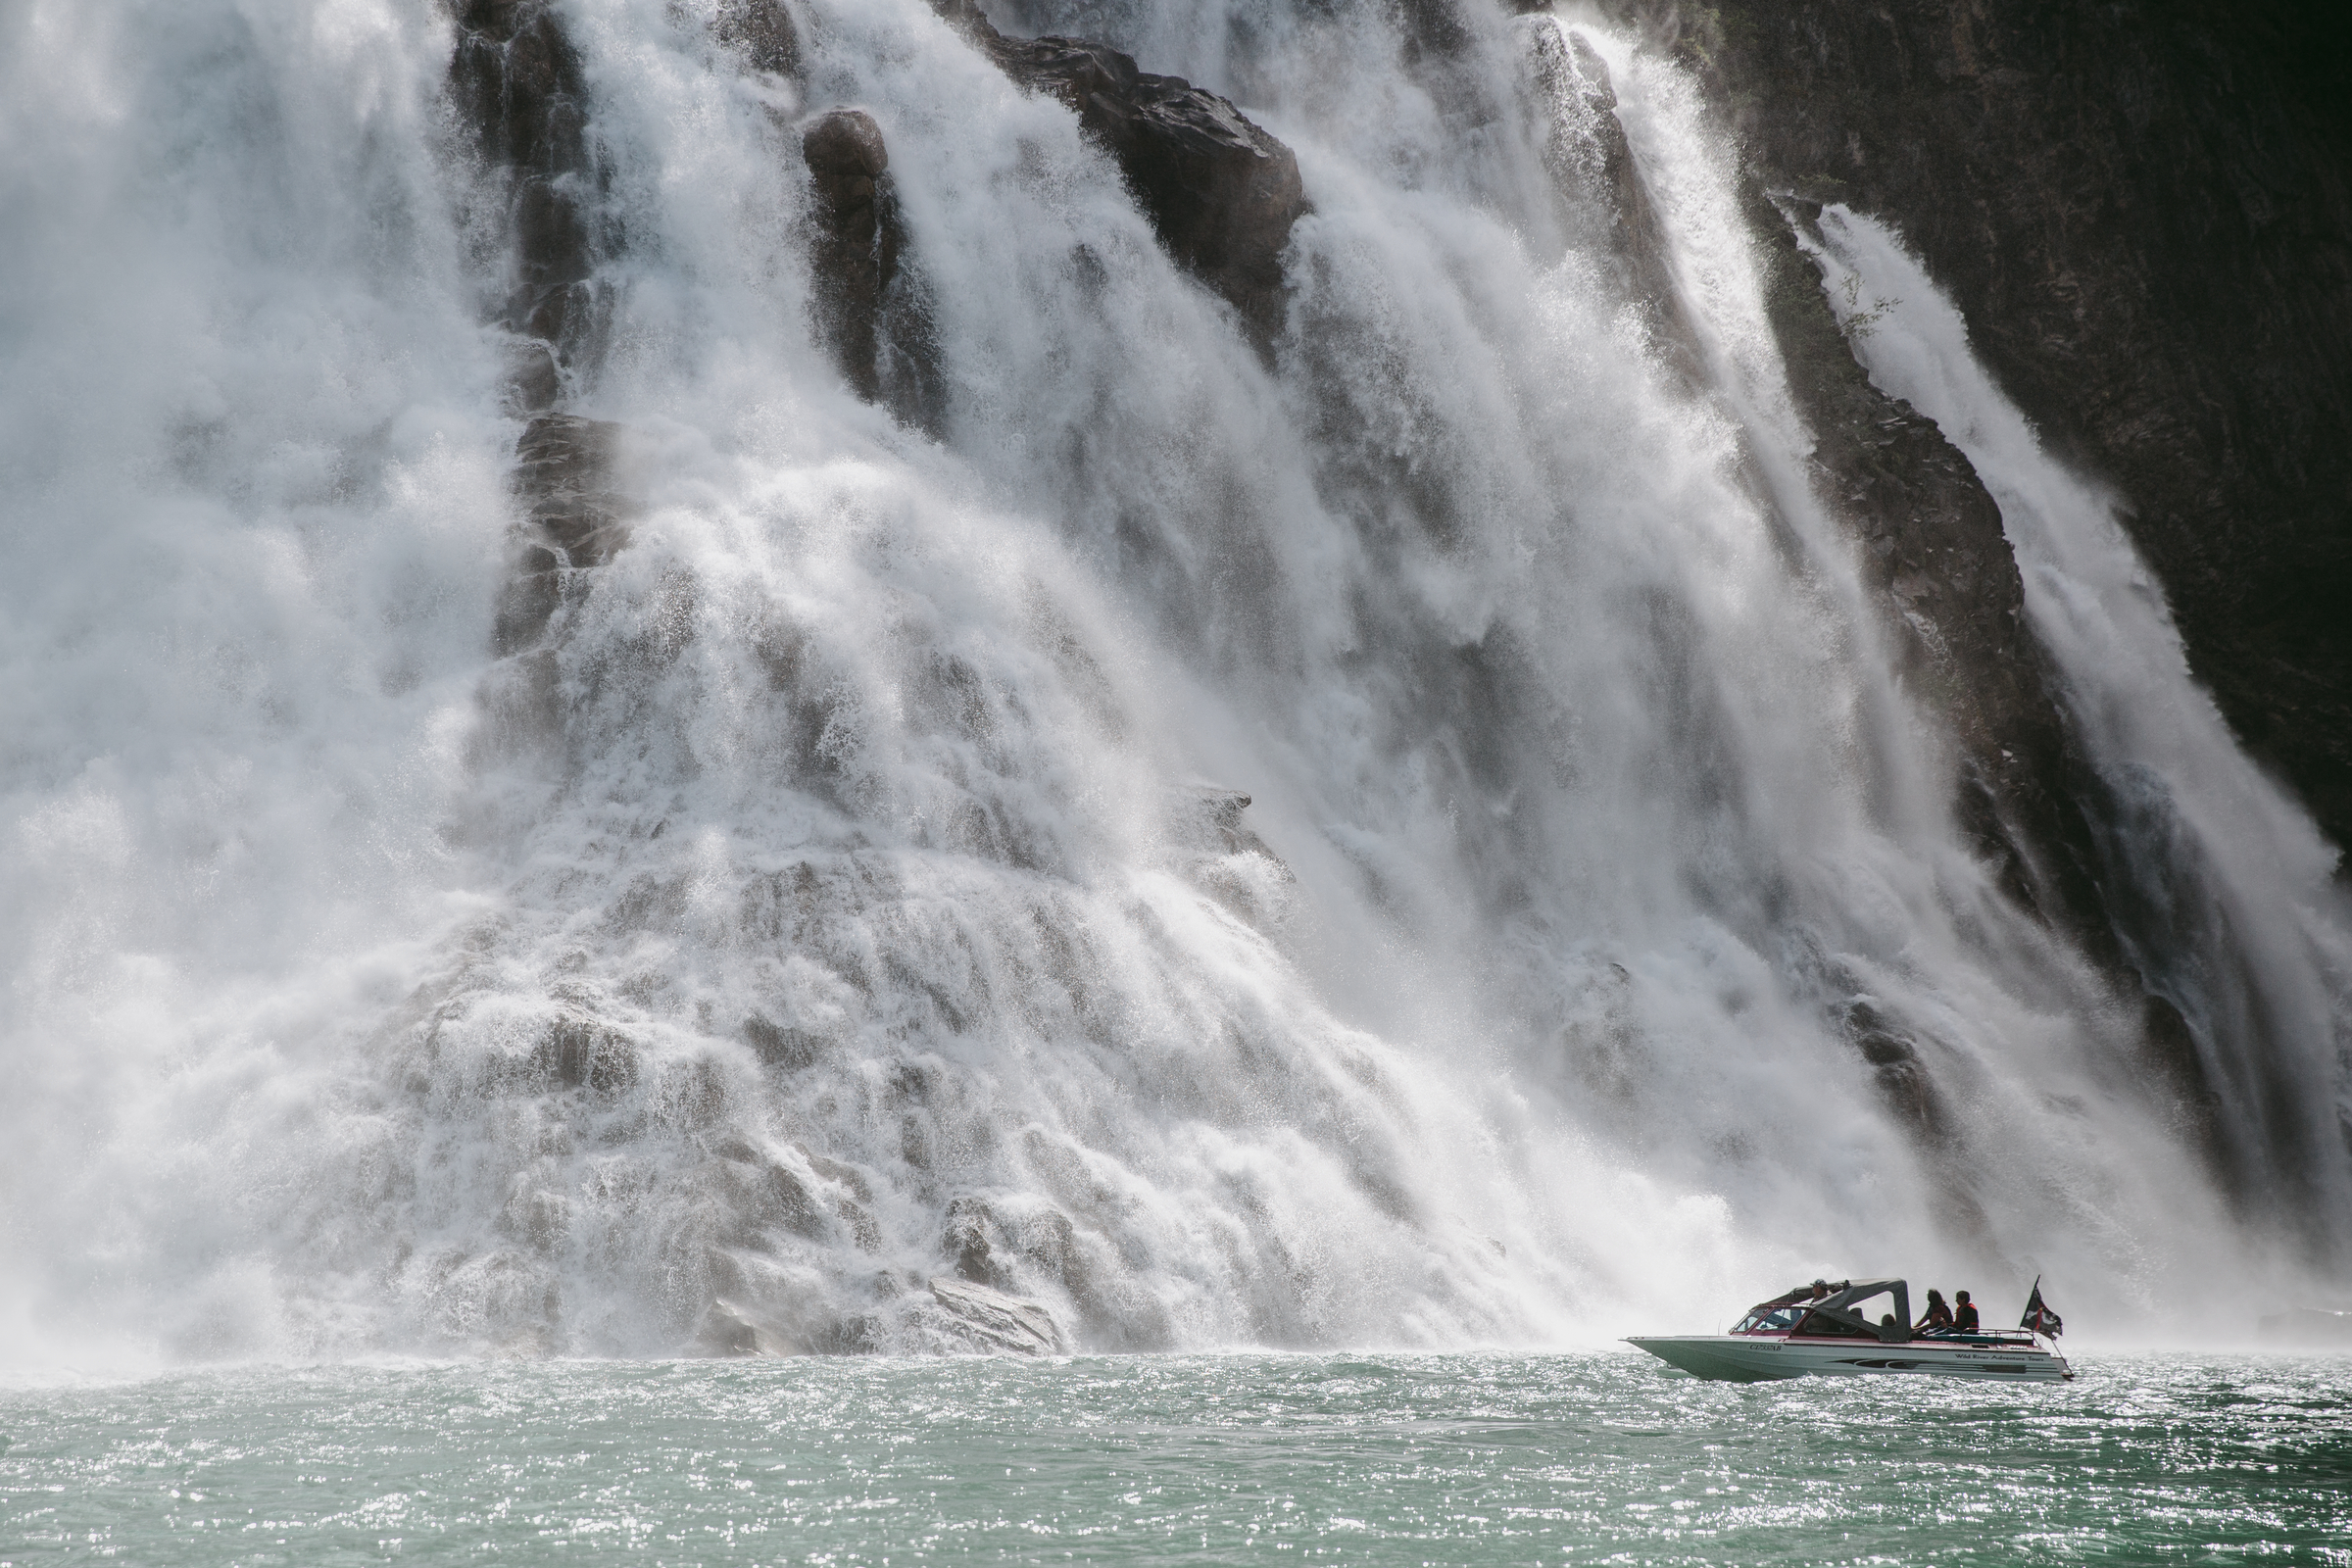 A river boat in the shadow of the towering cascades of Kinuseo Falls.